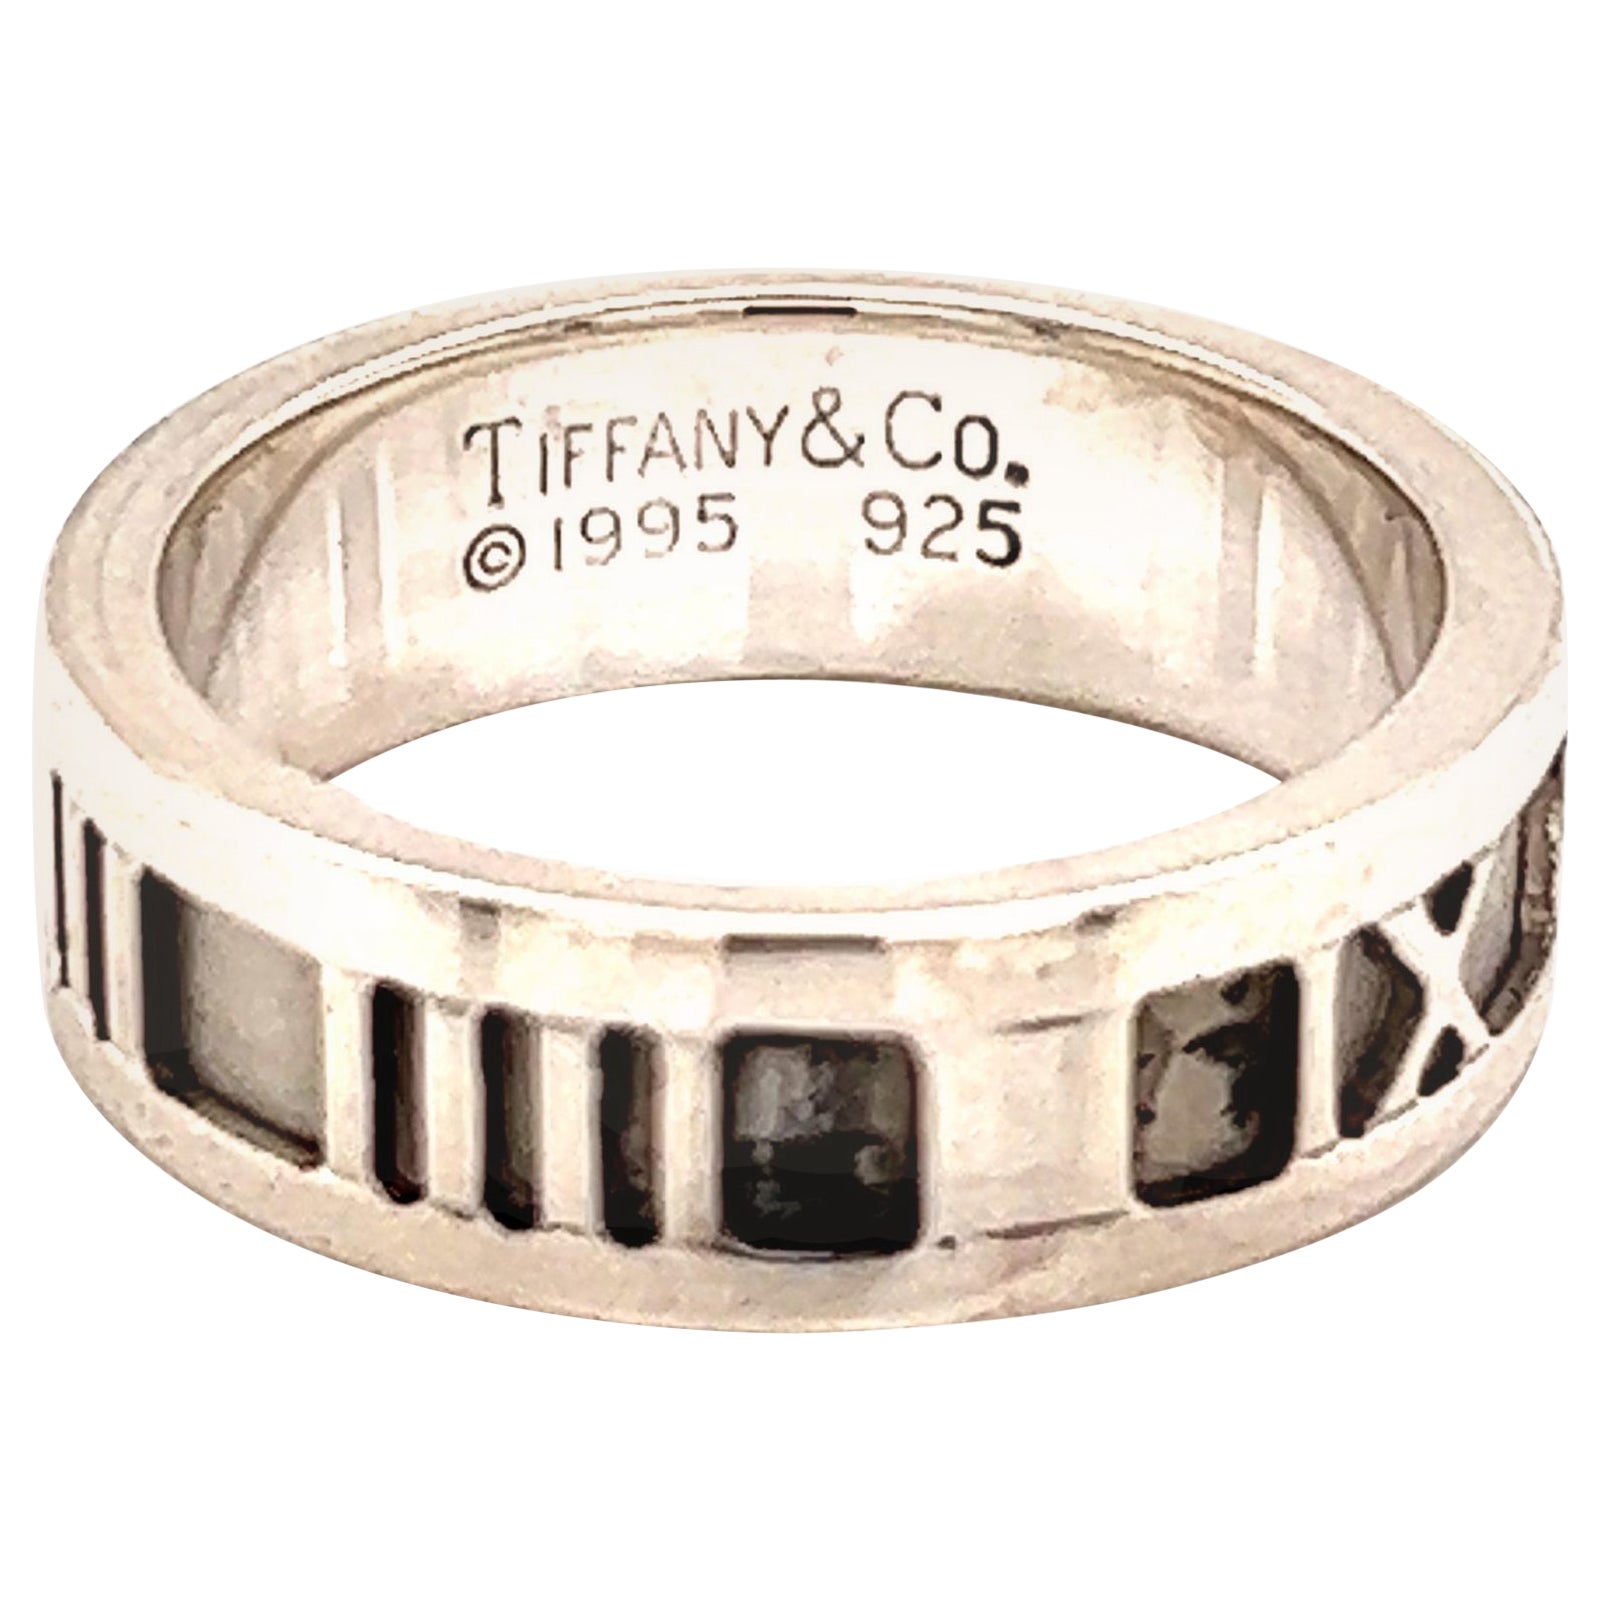 Tiffany & Co. Nachlass-Ring aus Sterlingsilber, 4,9 Gramm